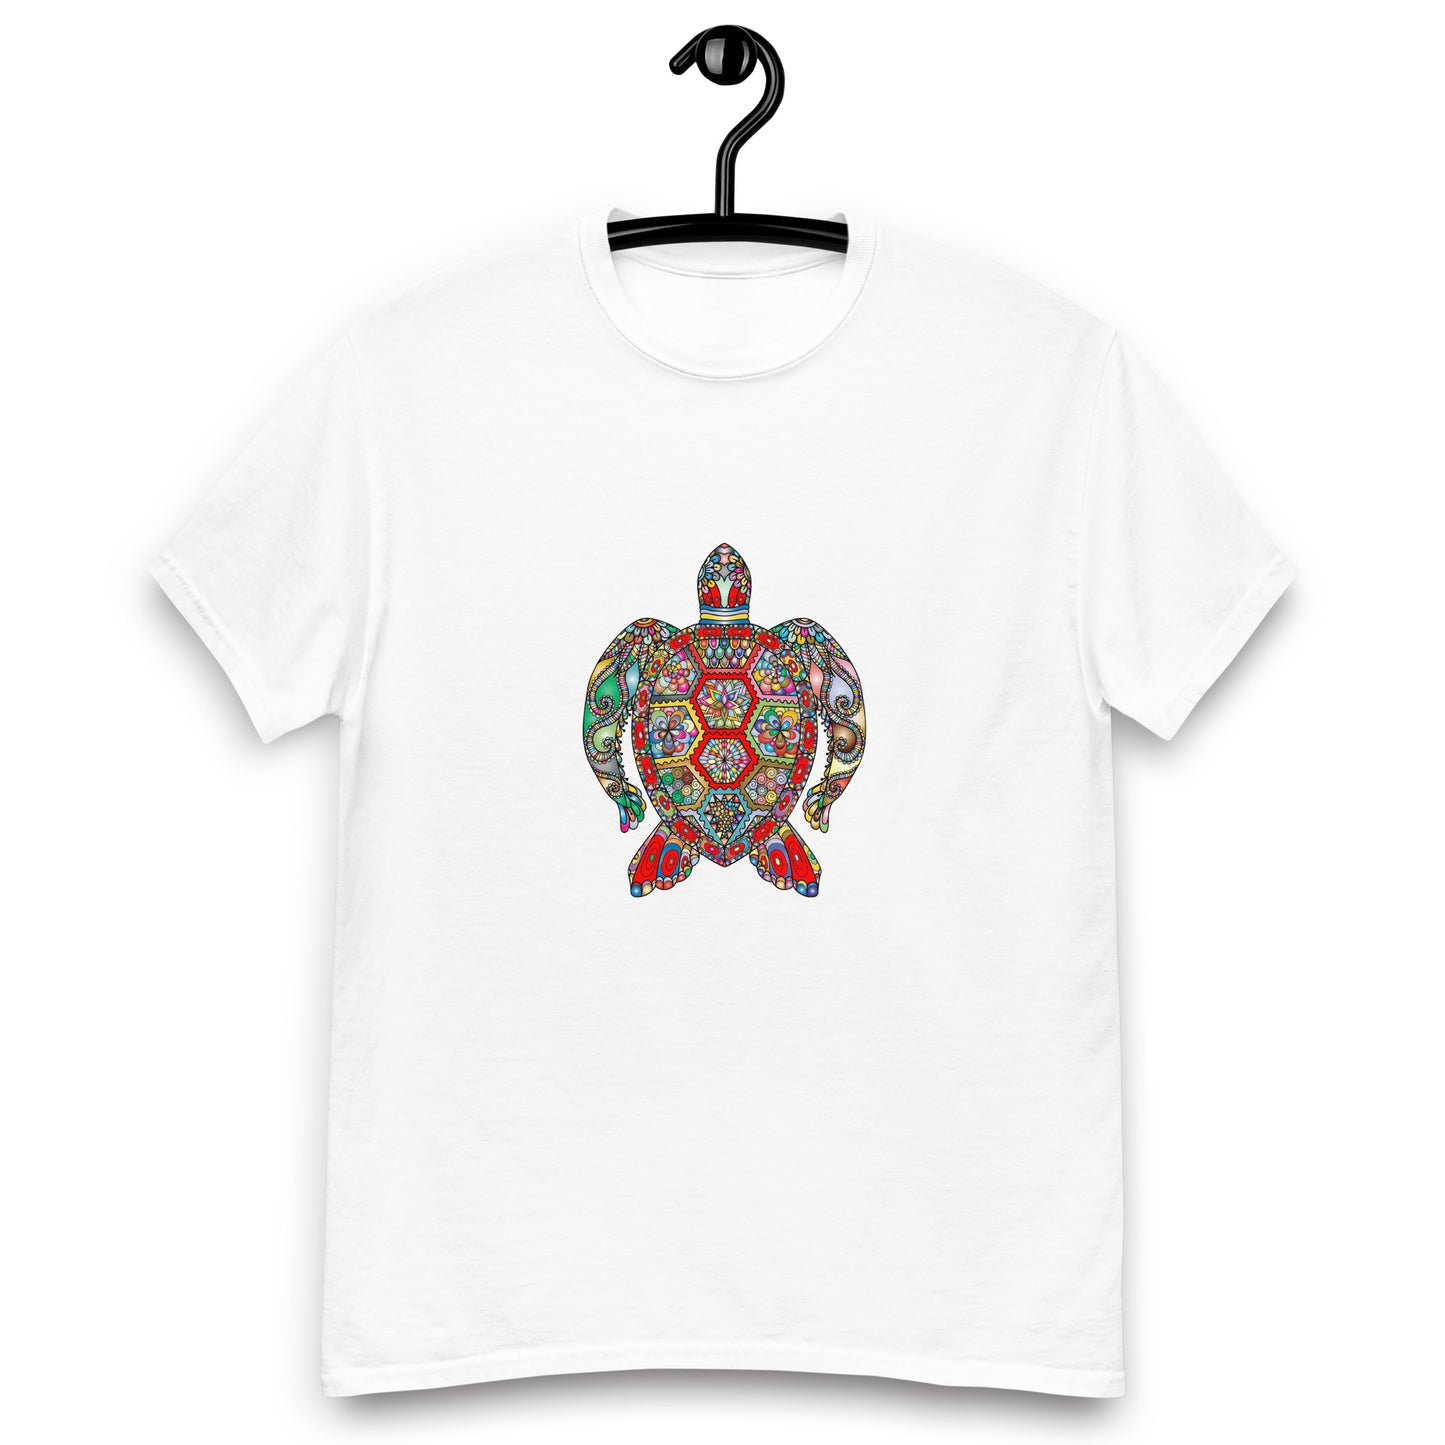 Men's classic t-shirt printed with colourful Turtle.